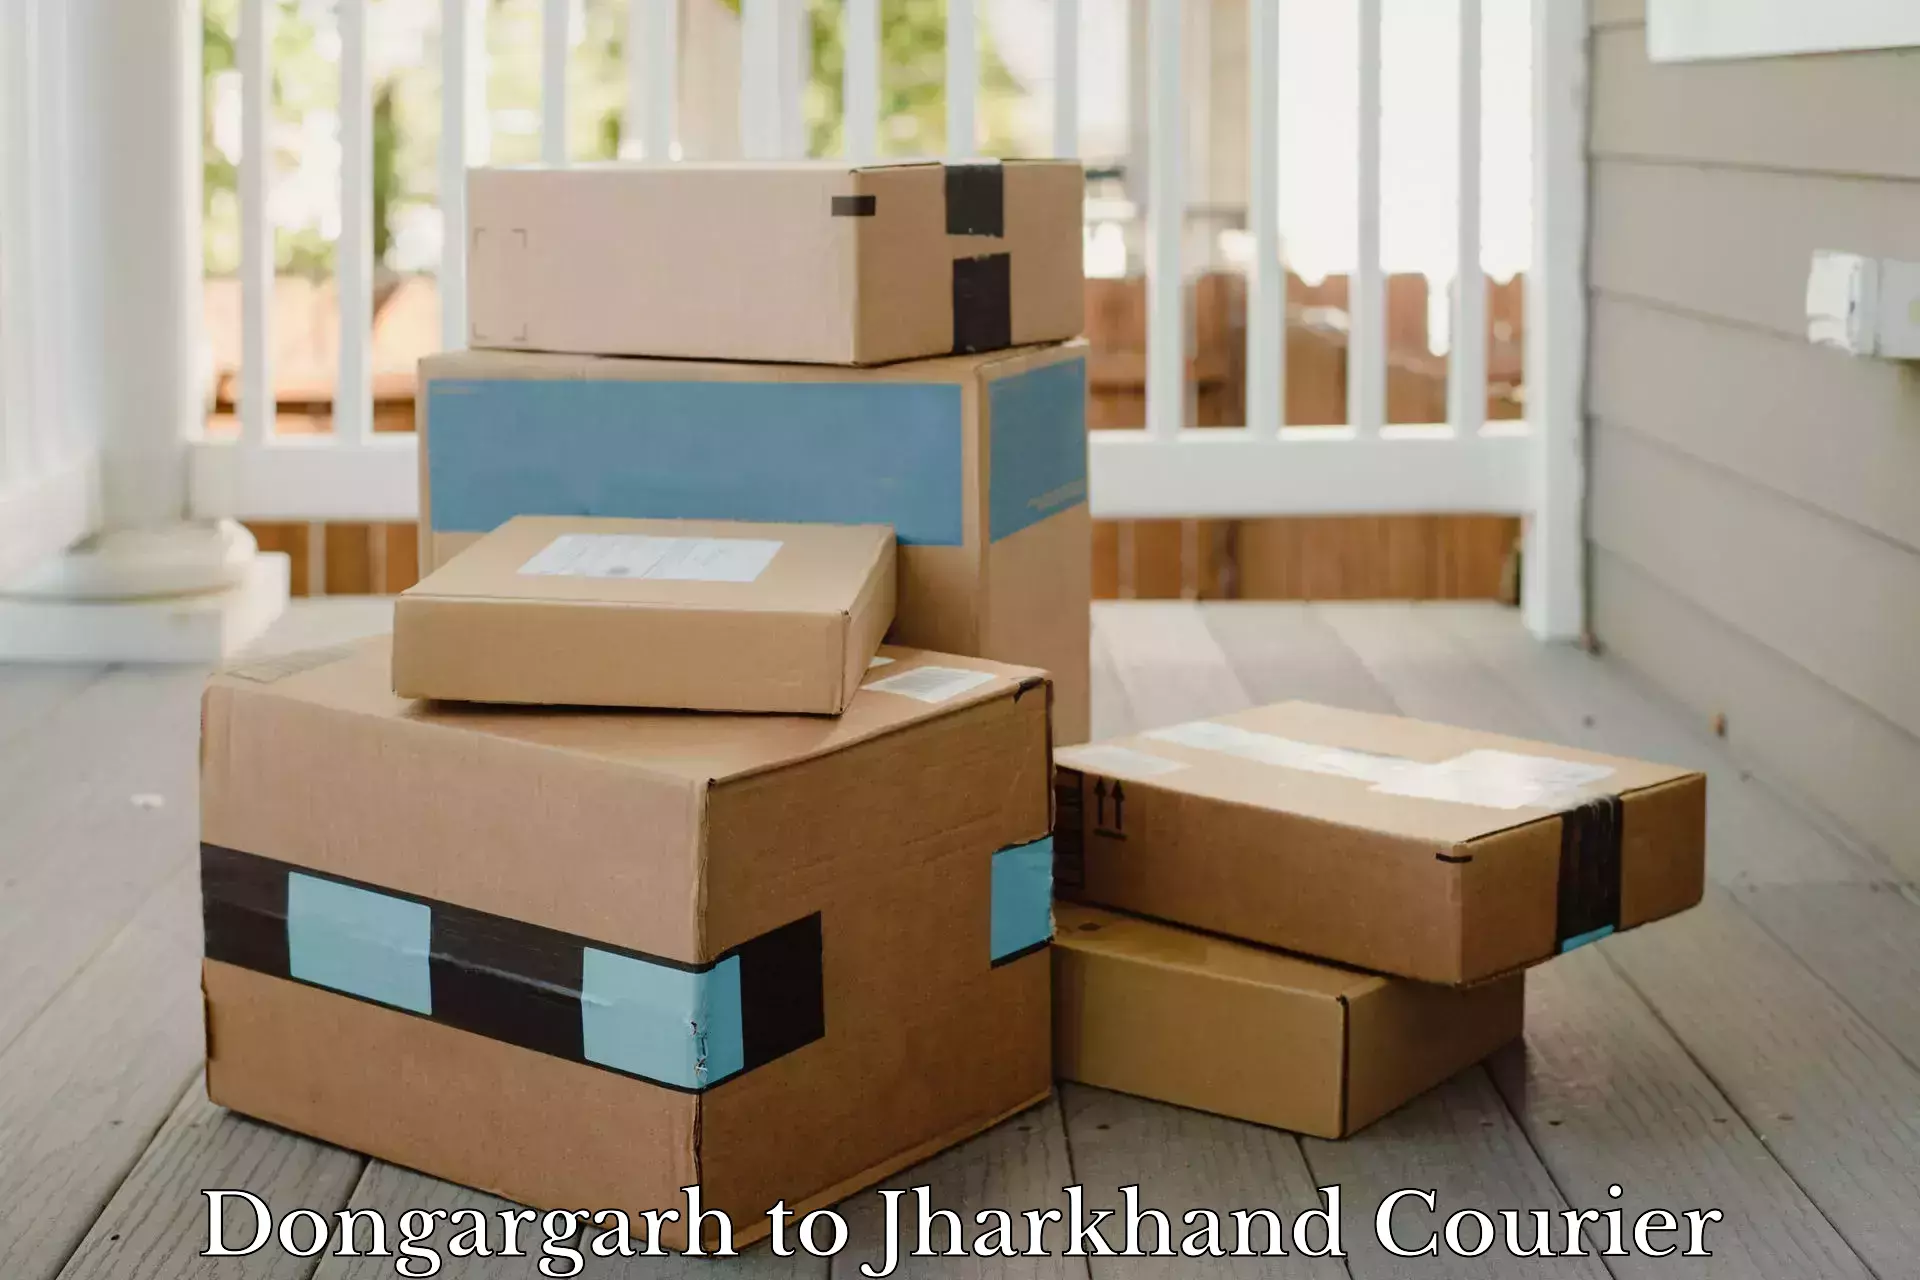 Customer-oriented courier services Dongargarh to Shikaripara